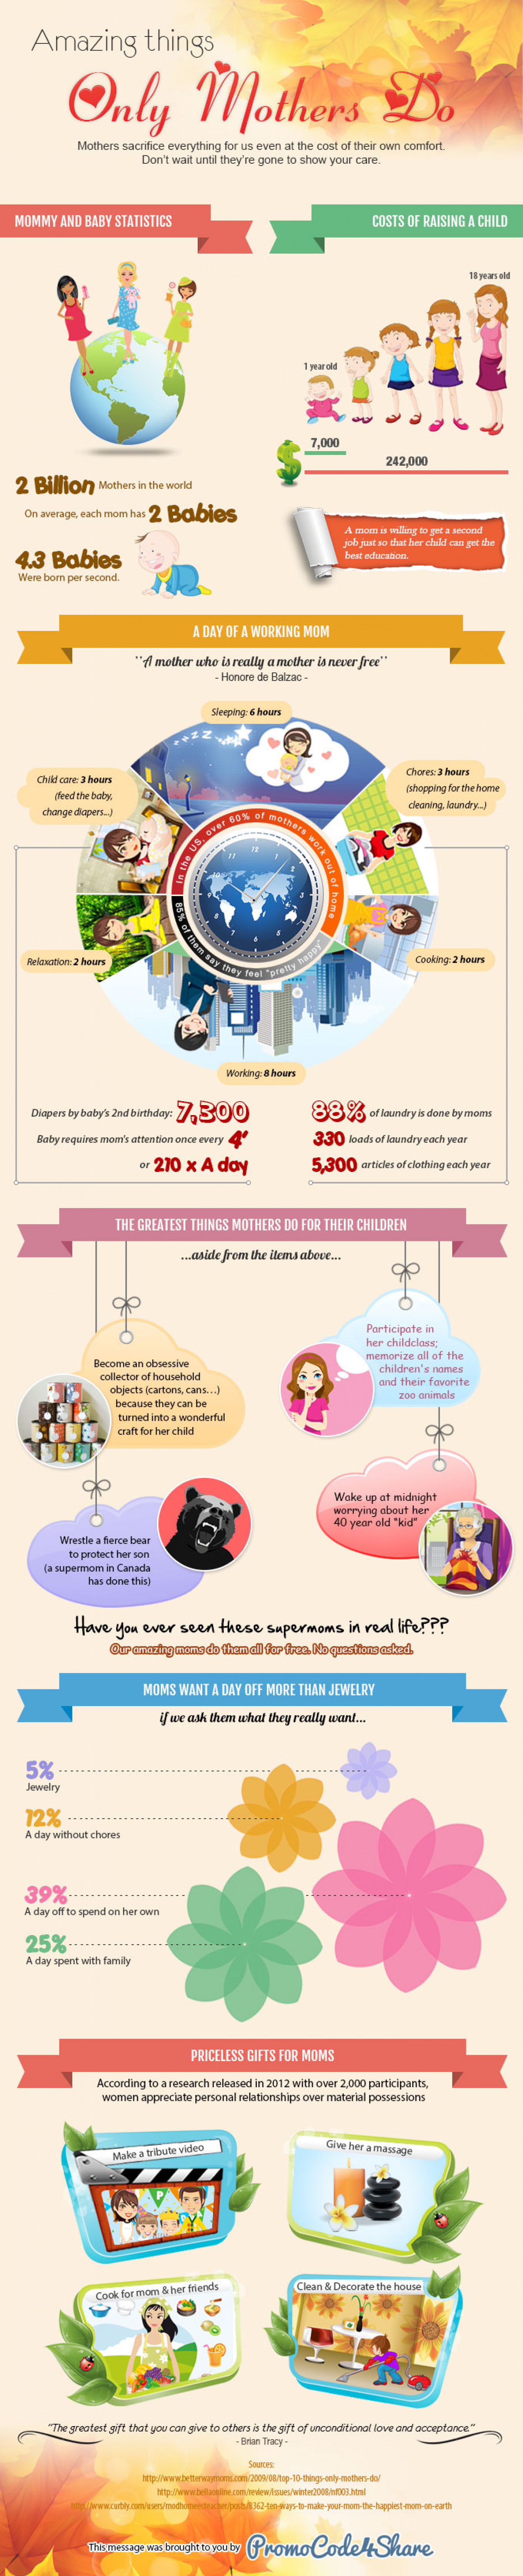 Amazing things only mothers do Infographic